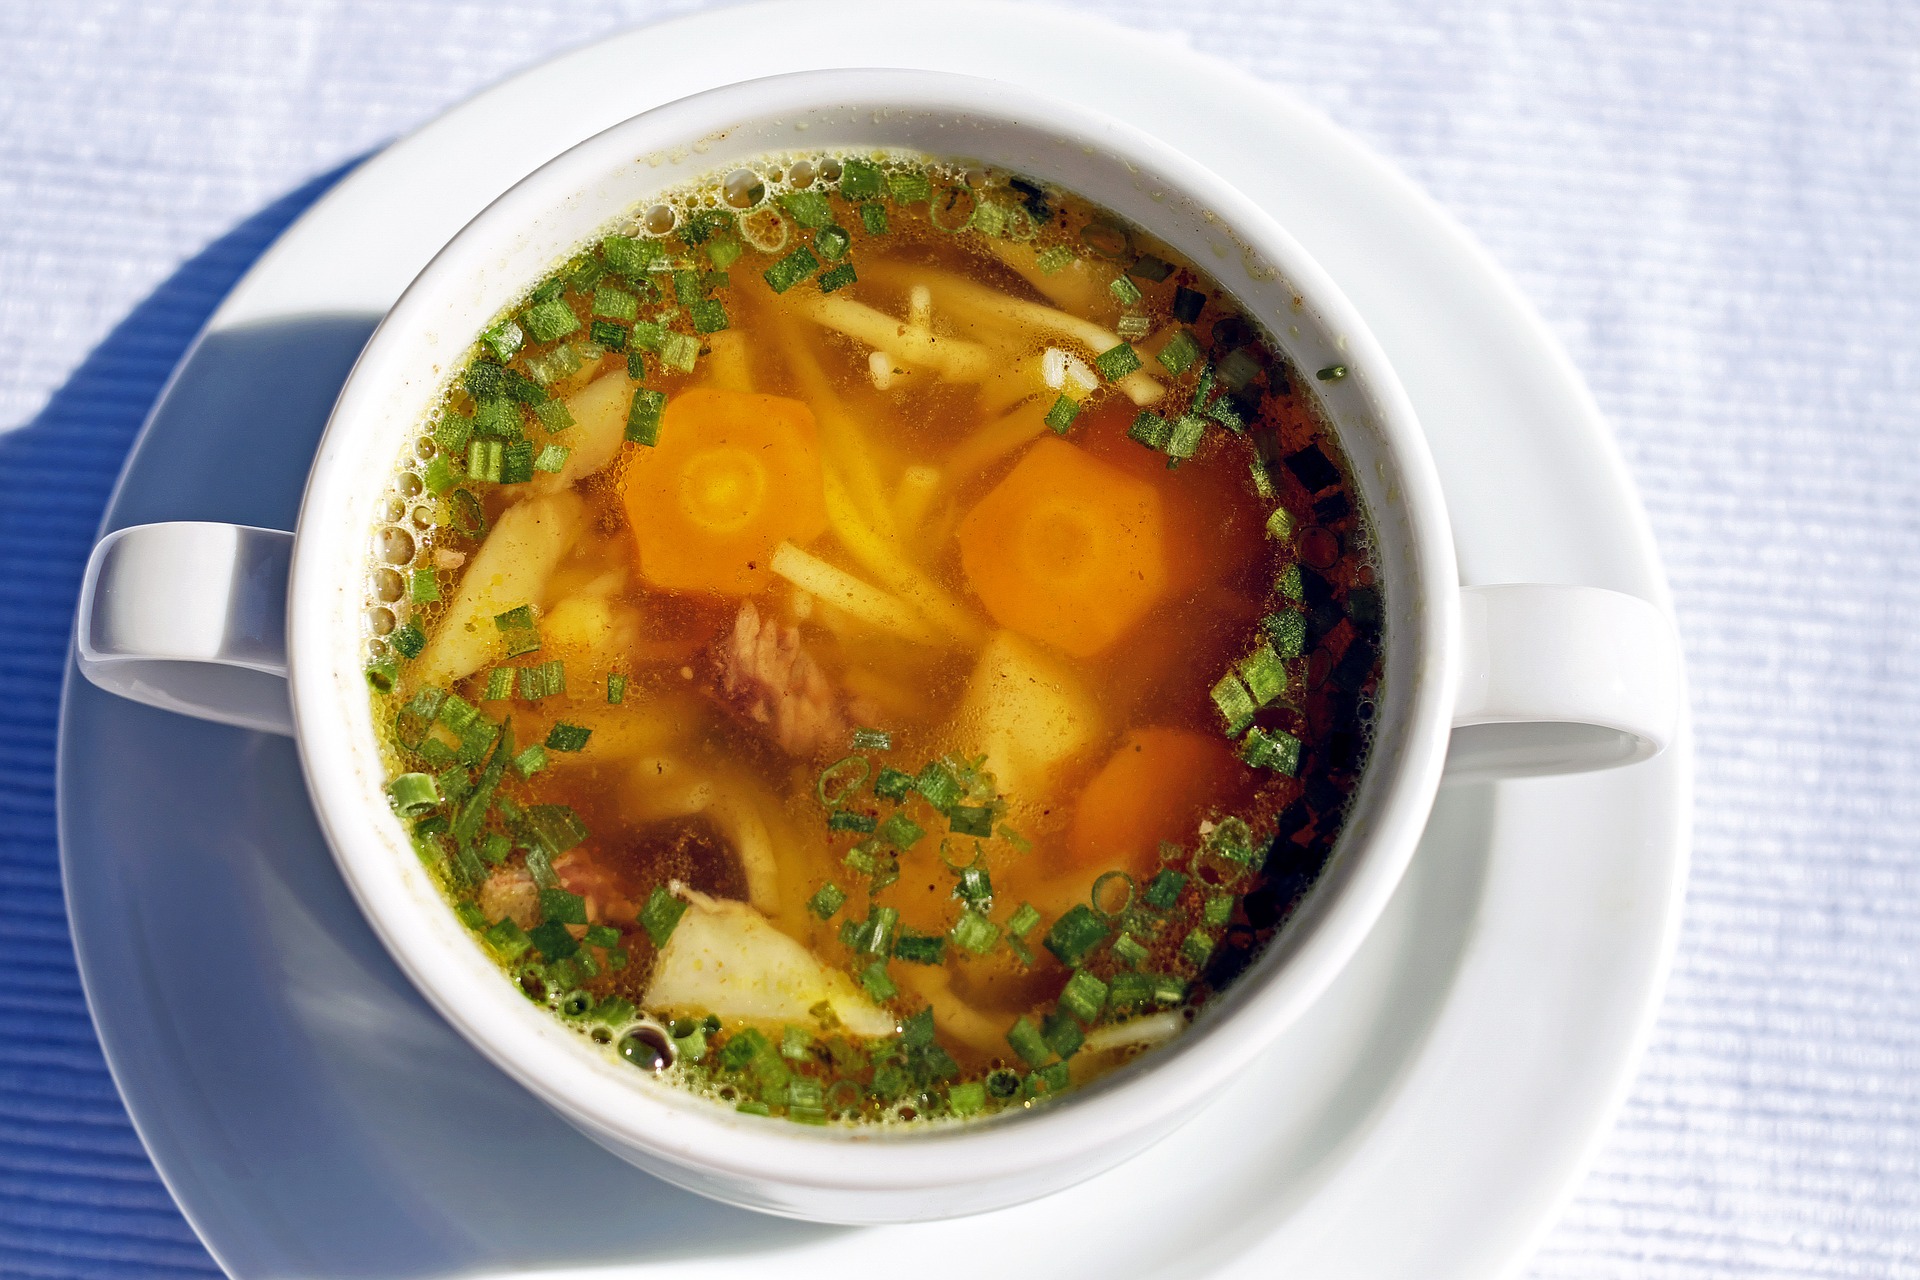 Eco soup with chicken carcass